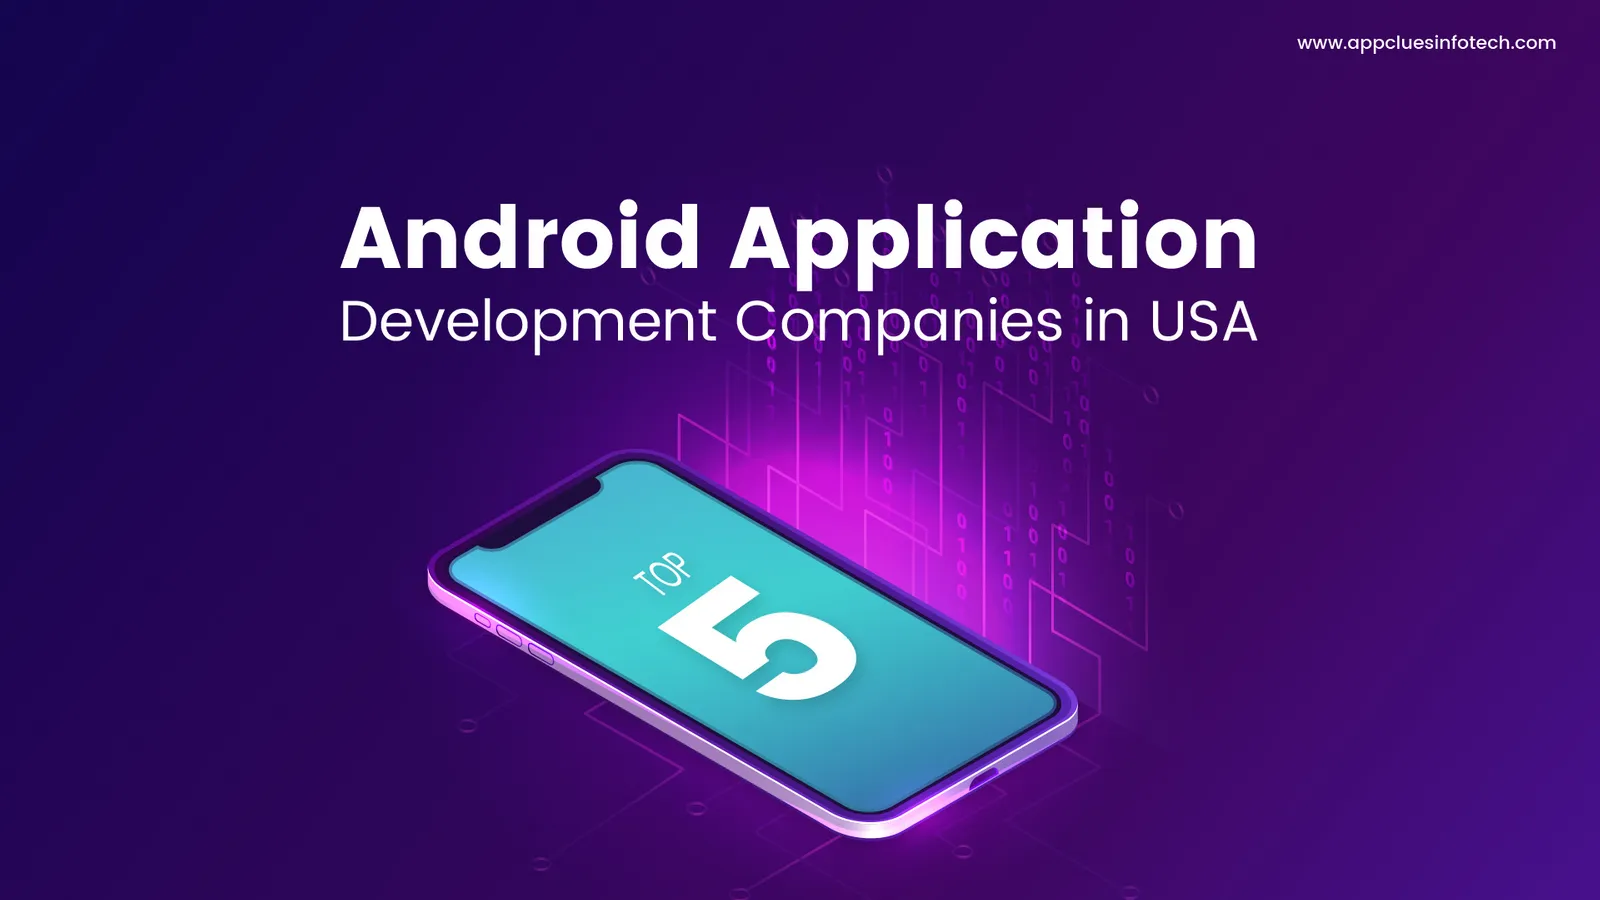 Top Android Application Development Companies in USA